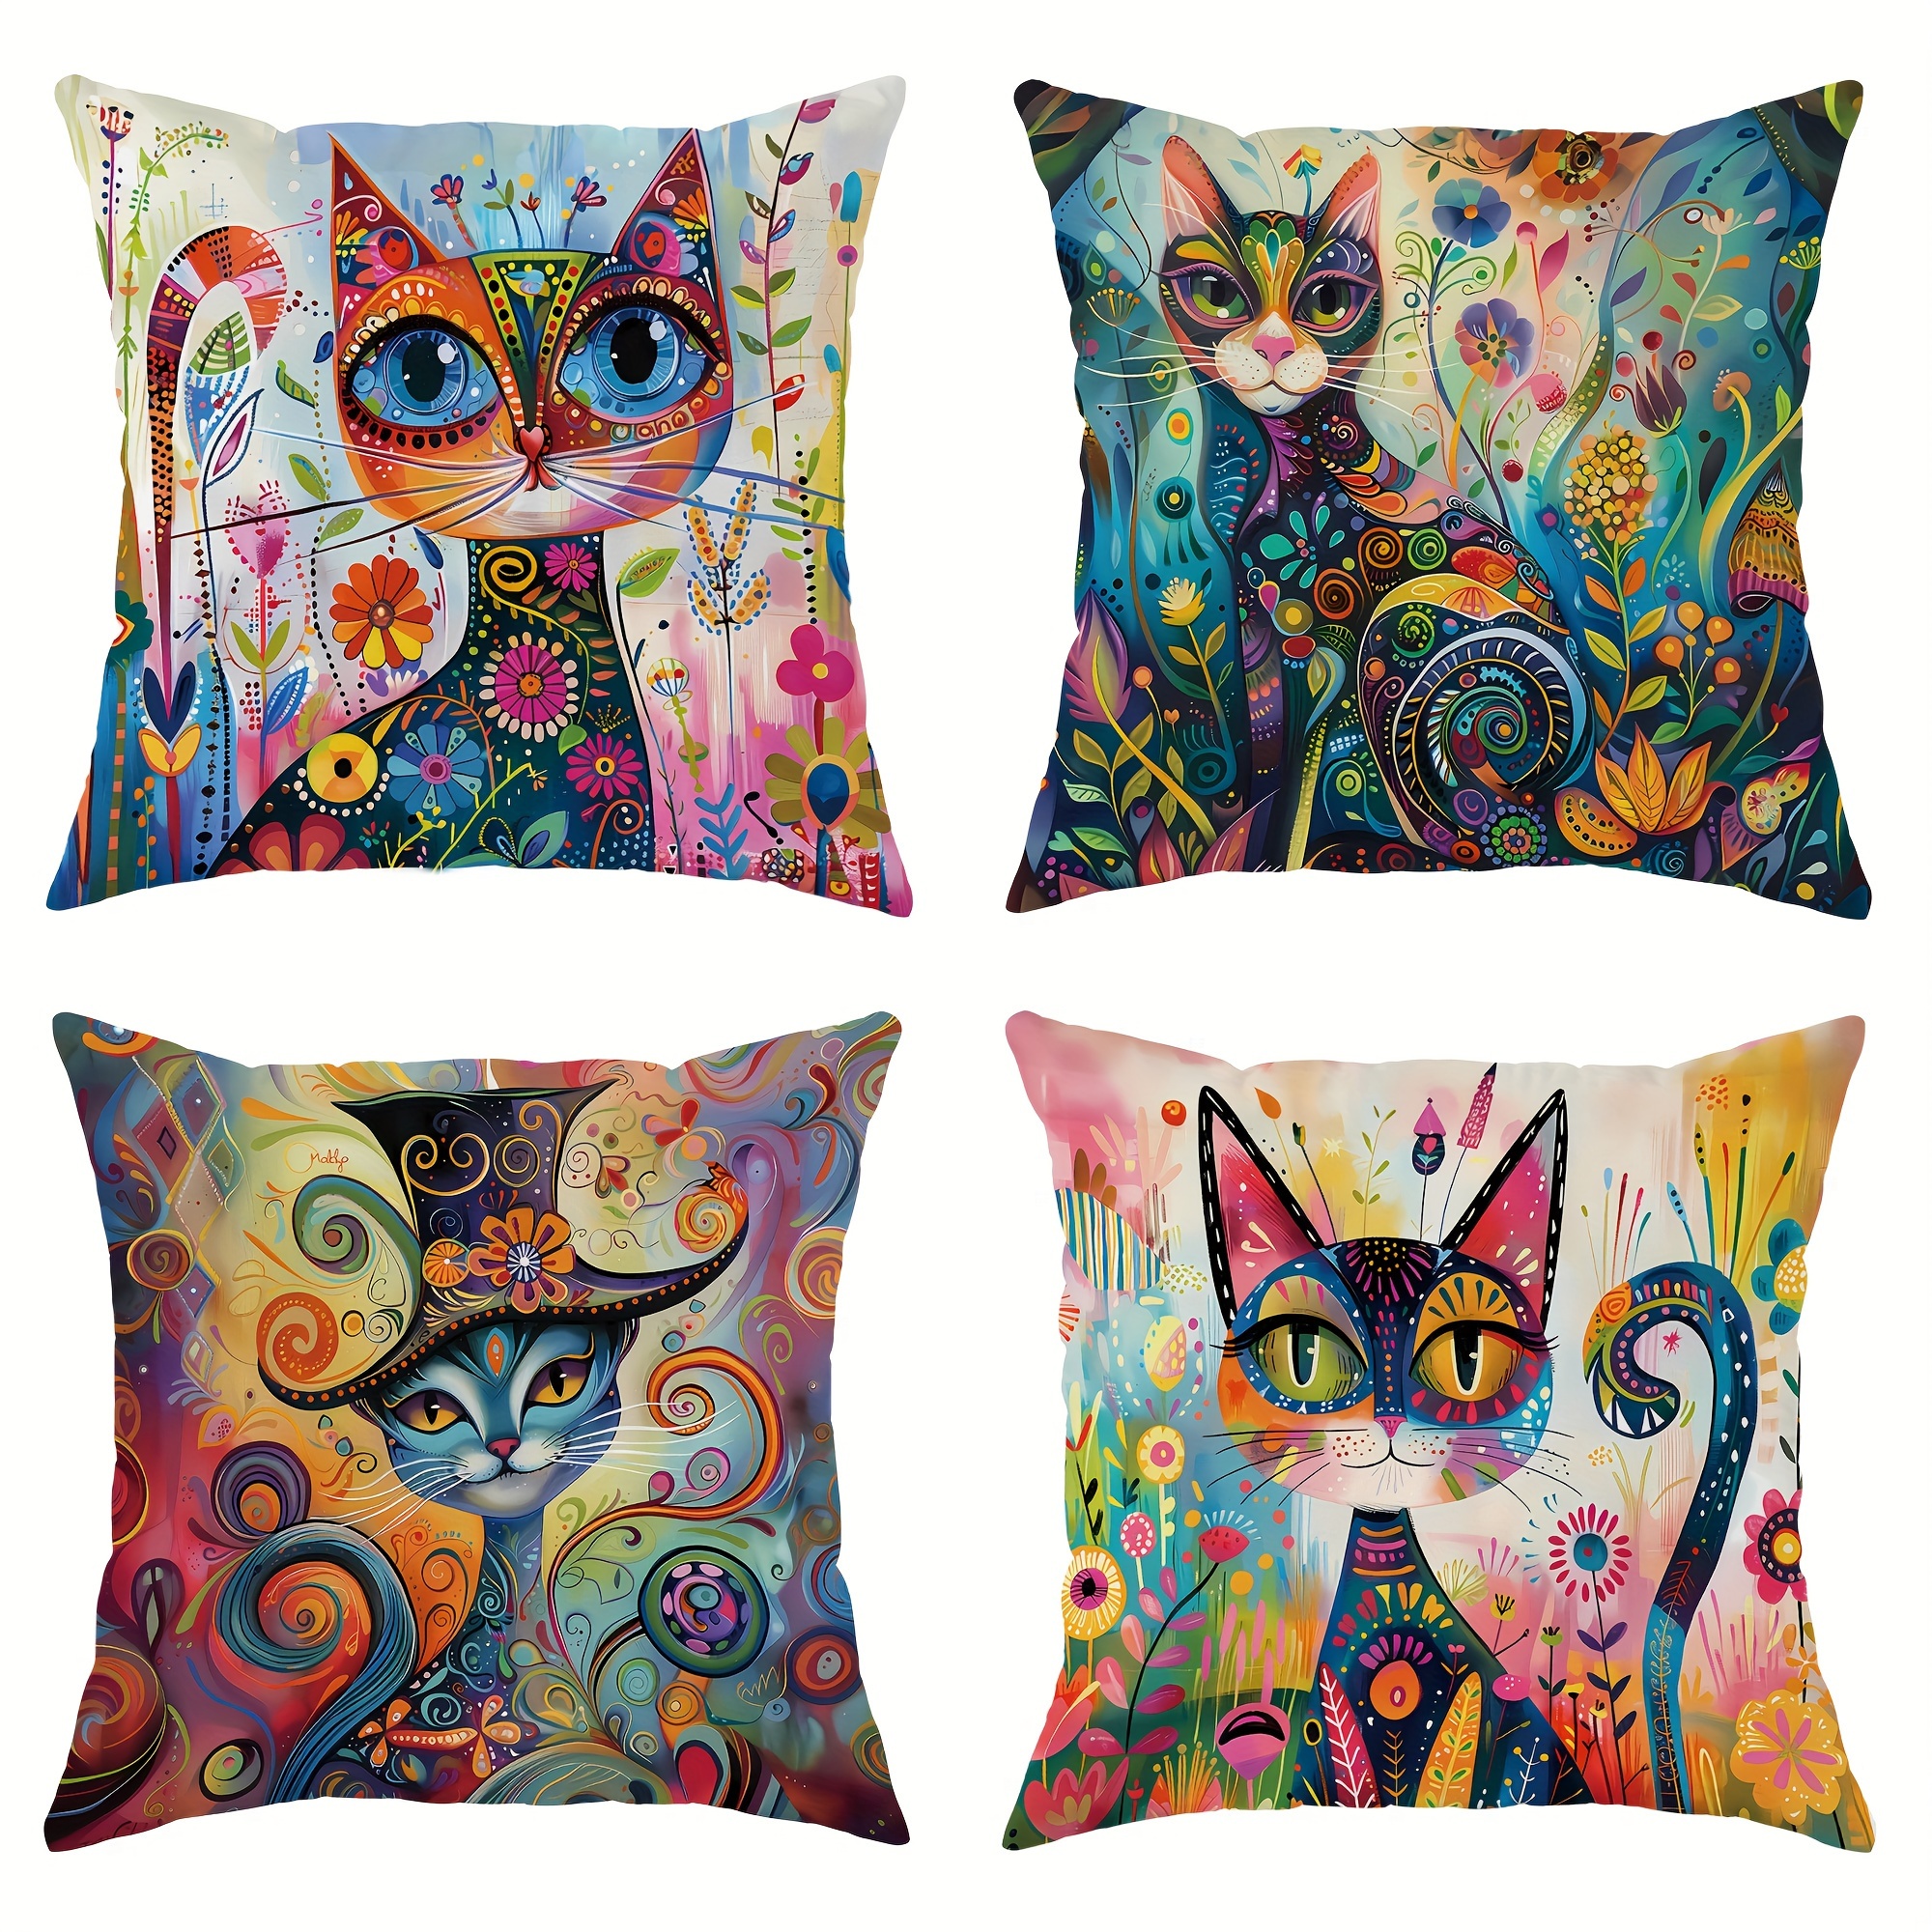 

whimsical Charm" 4-piece Set Velvet Throw Pillow Covers - Funny Cartoon Cat & Floral Designs In Pink, Purple, Blue, Green | 18x18 Inch | Perfect For Living Room & Bedroom Decor